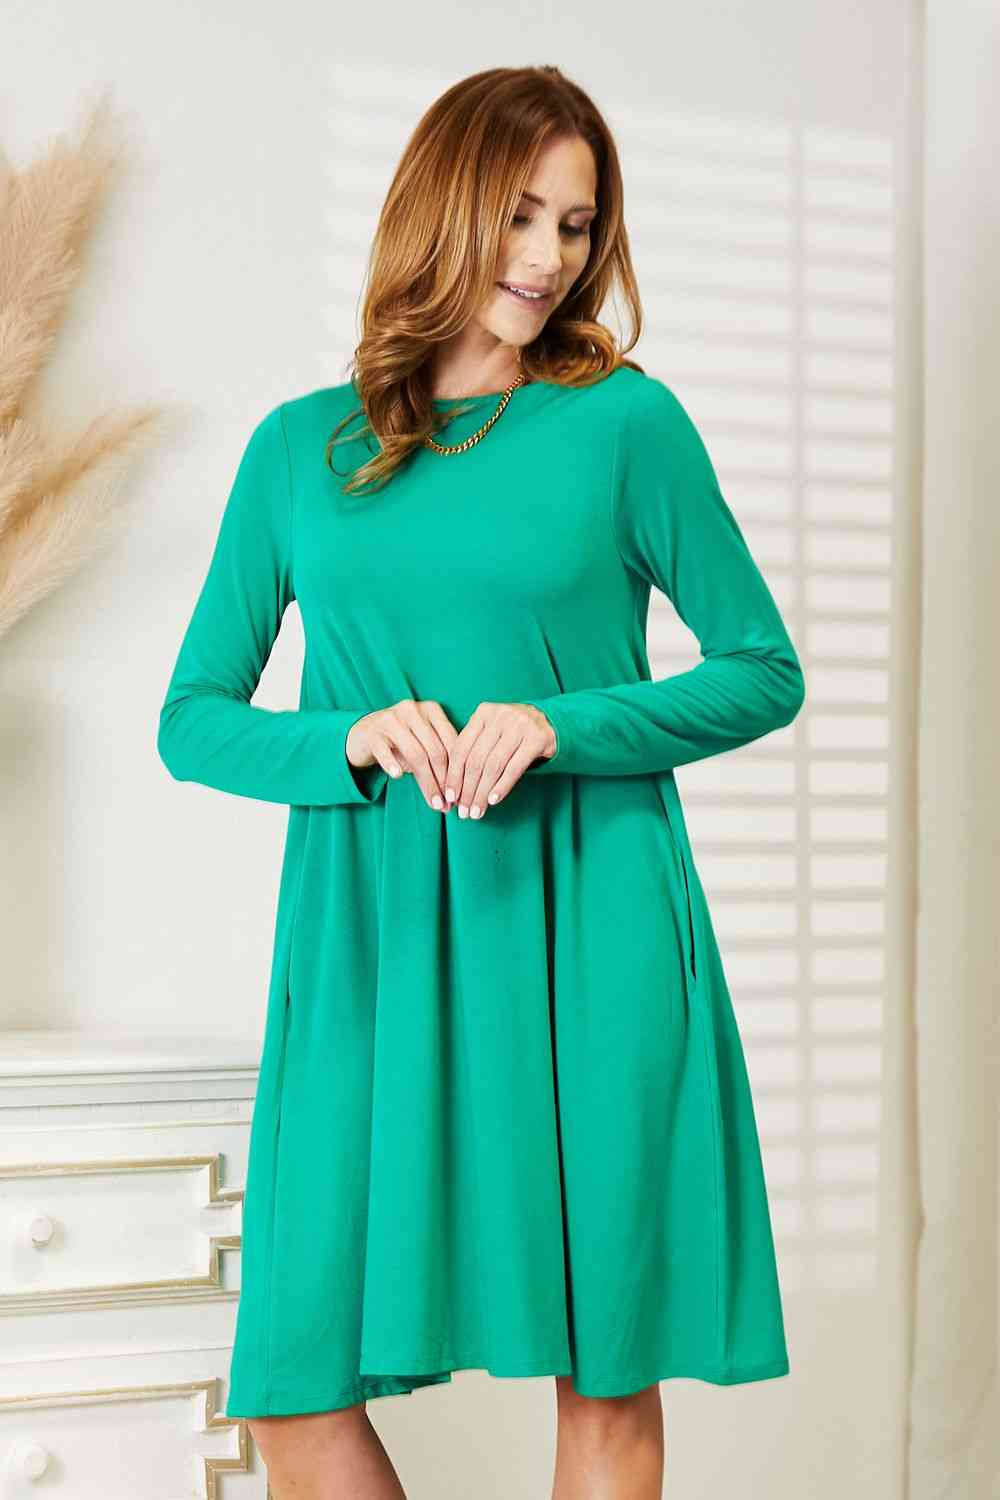 Long Sleeve Flare Dress with Pockets - All Dresses - Dresses - 6 - 2024